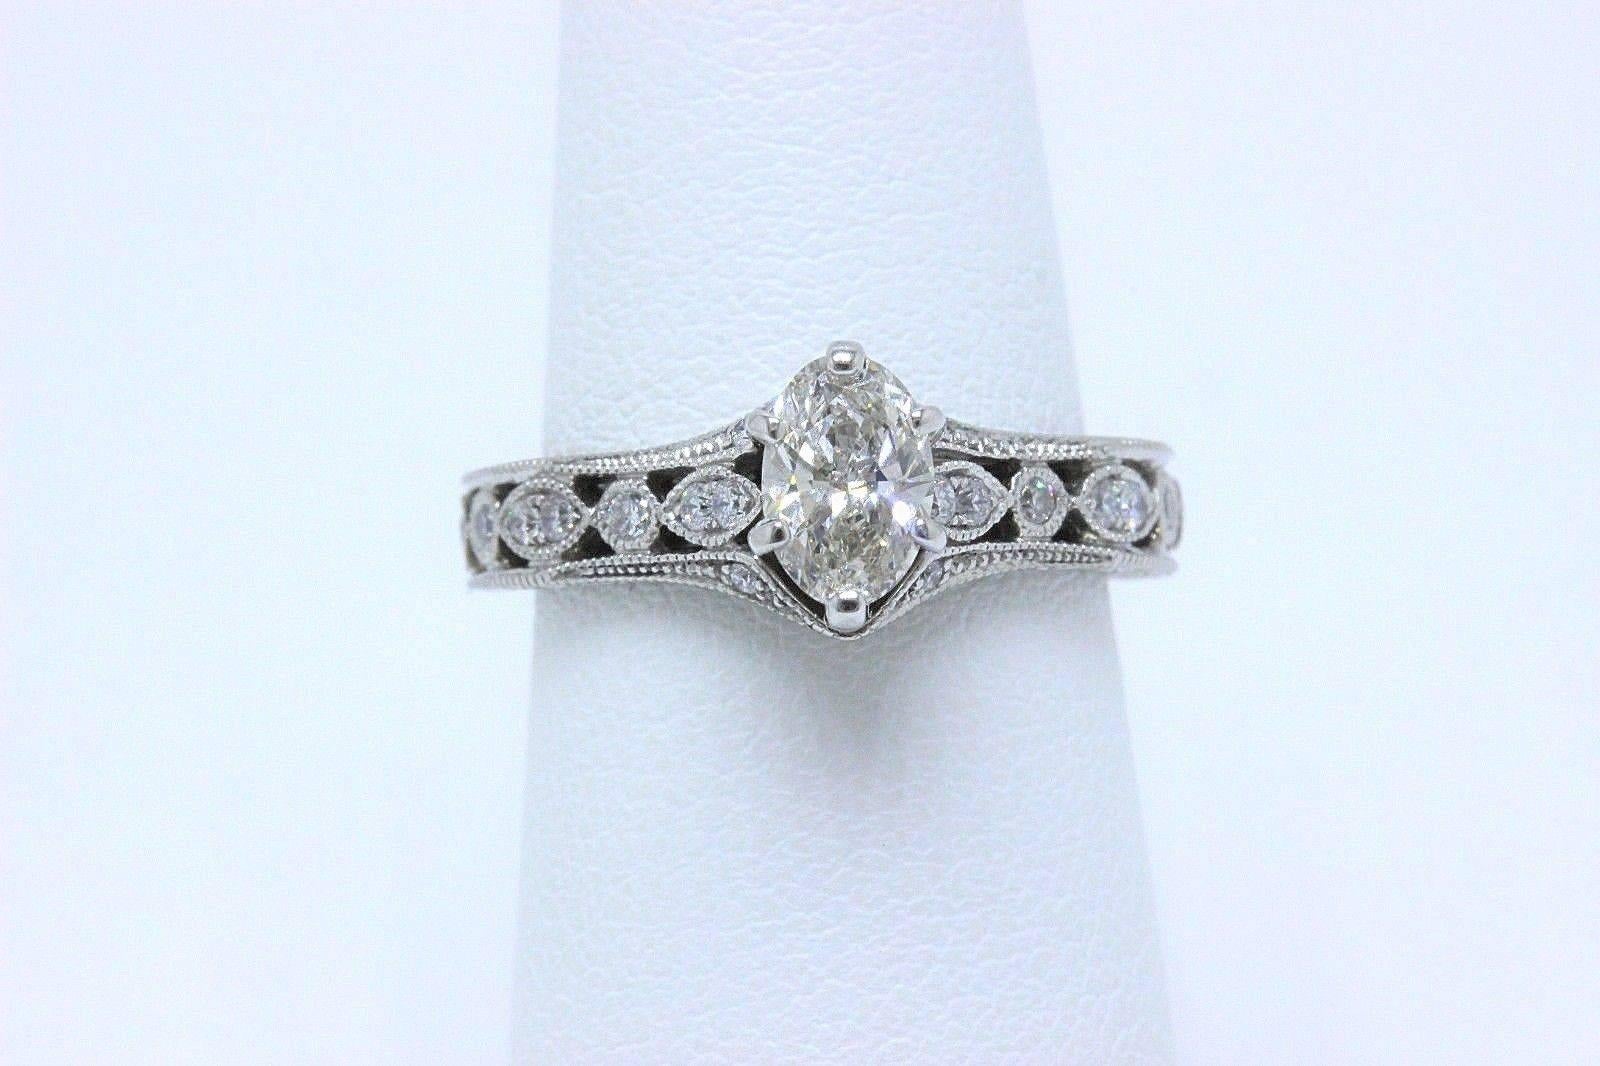 NEIL LANE ENGAGEMENT RING 3/4 TCW DIAMONDS 
Style:  Solitaire With Accent Diamonds with Milgrain Band
SKU Number:  940201510
Metal:  14KT White Gold
Size:  5.5 - Sizable
Total Carat Weight:  3/4 TCW
Diamond Shape:  Marquise Diamond 0.56 CTS 
Diamond